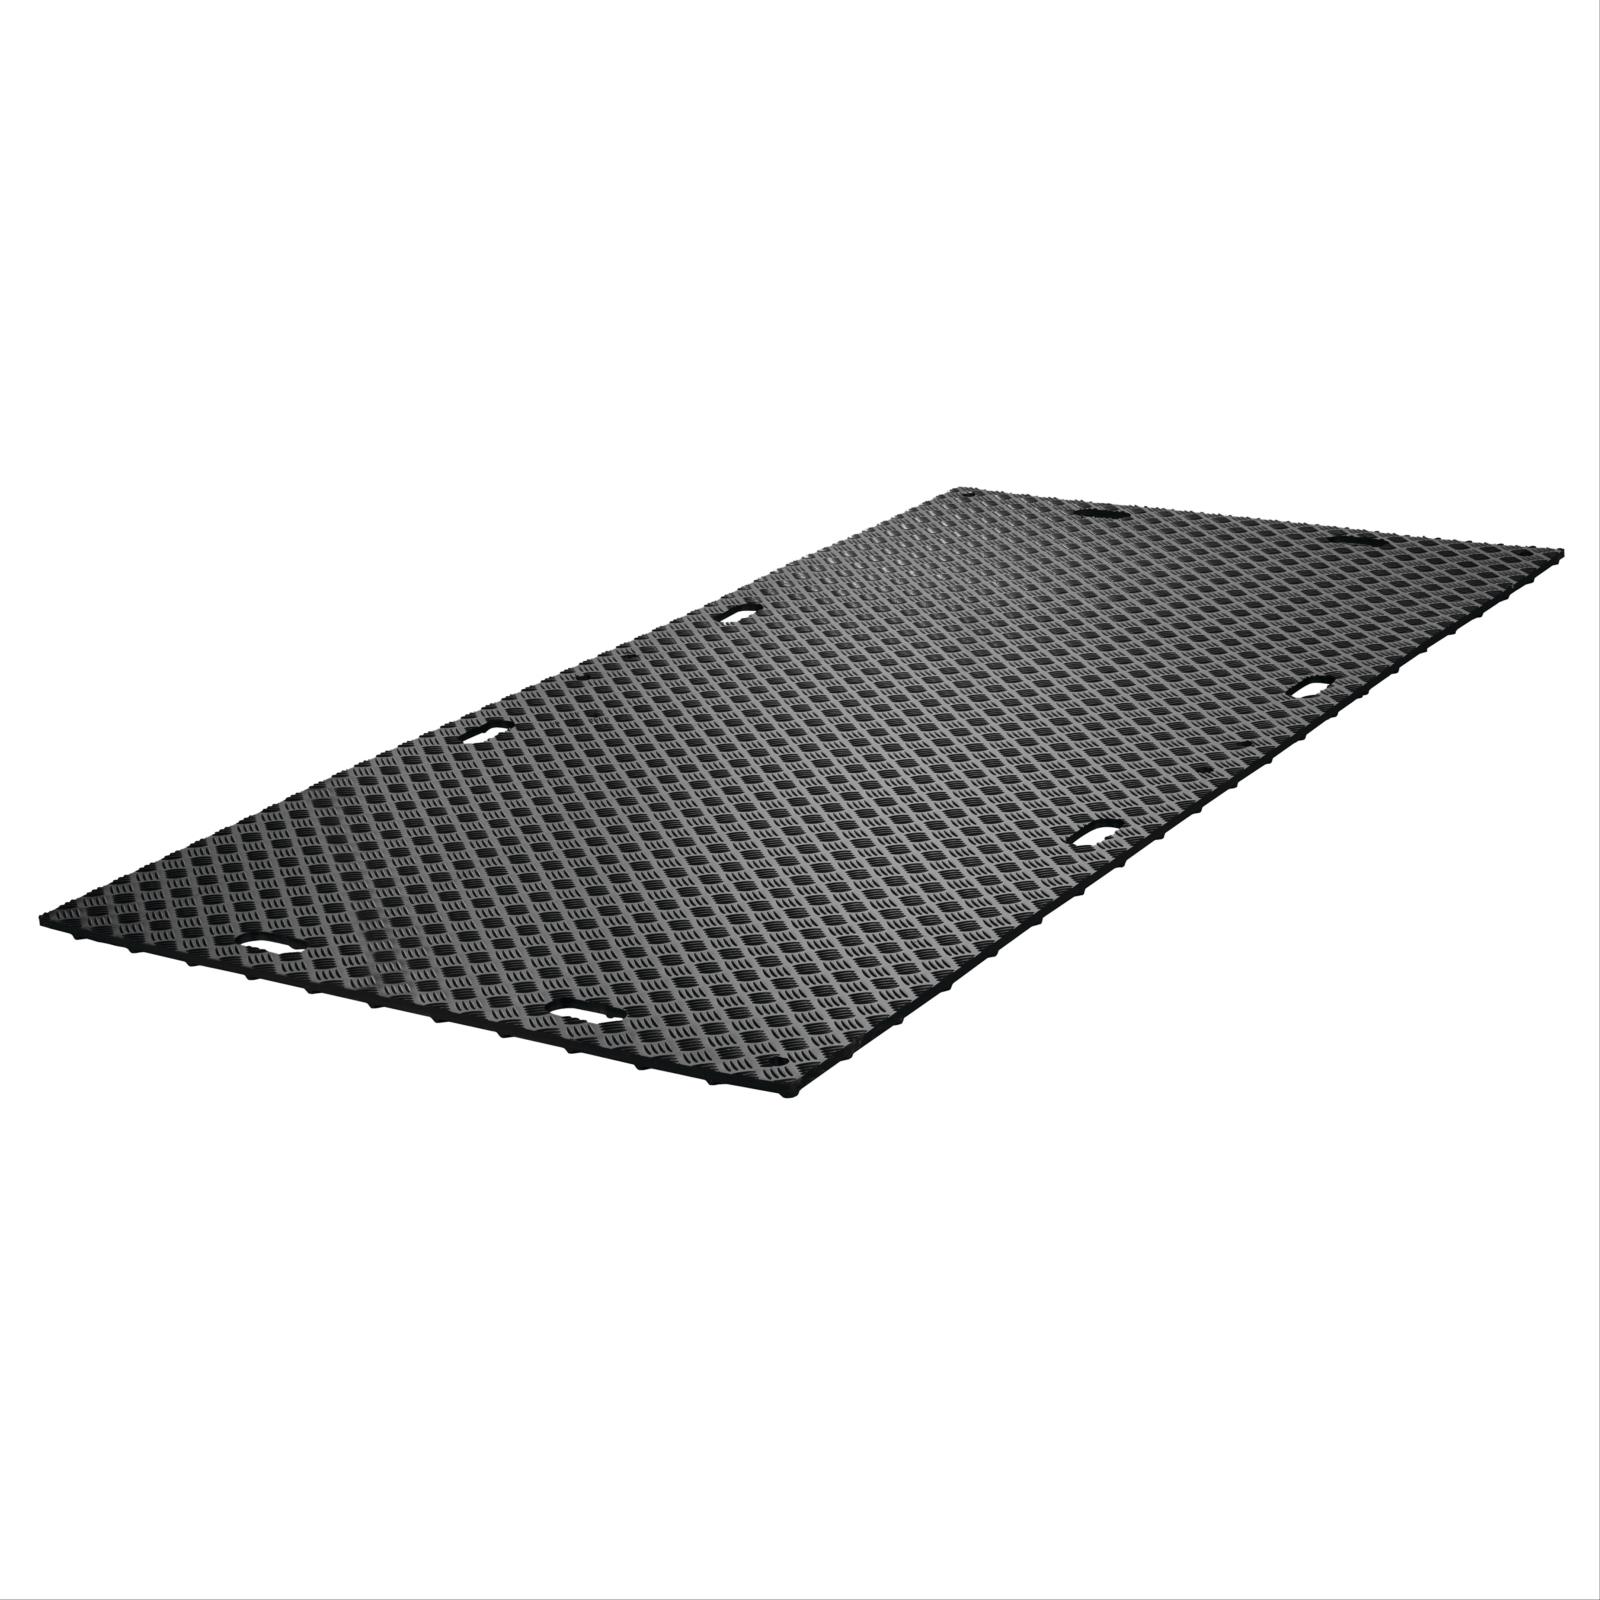 MambaMAT® Composite Mat for Ground Protection, 95 Ton Load Capacity